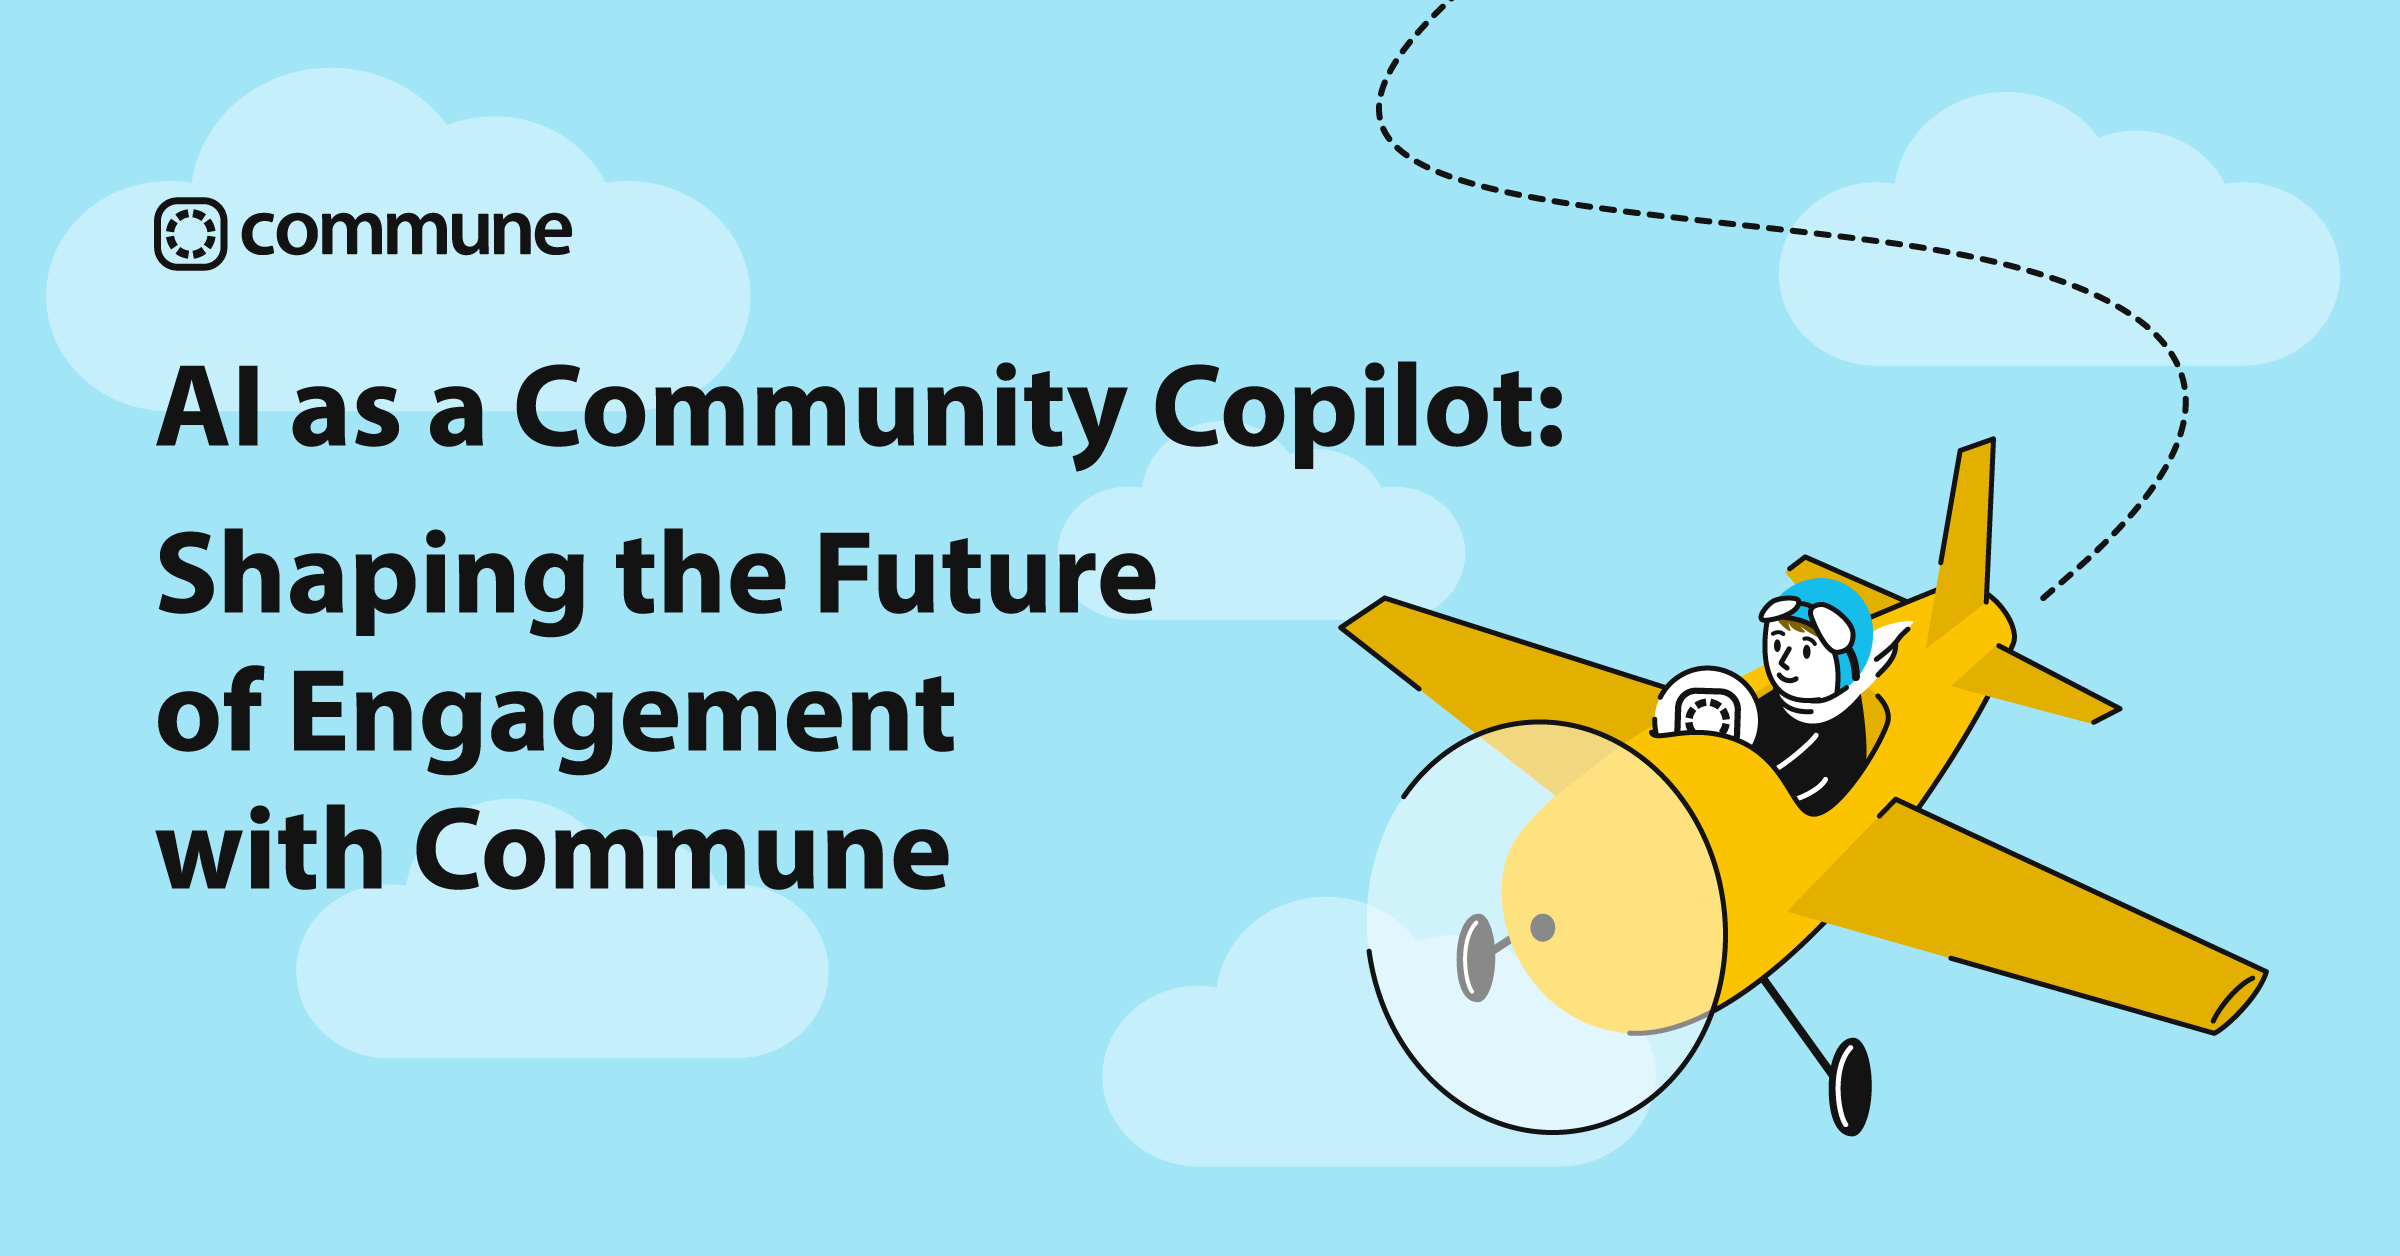 AI as a Community Copilot: Shaping the Future of Engagement with Commune